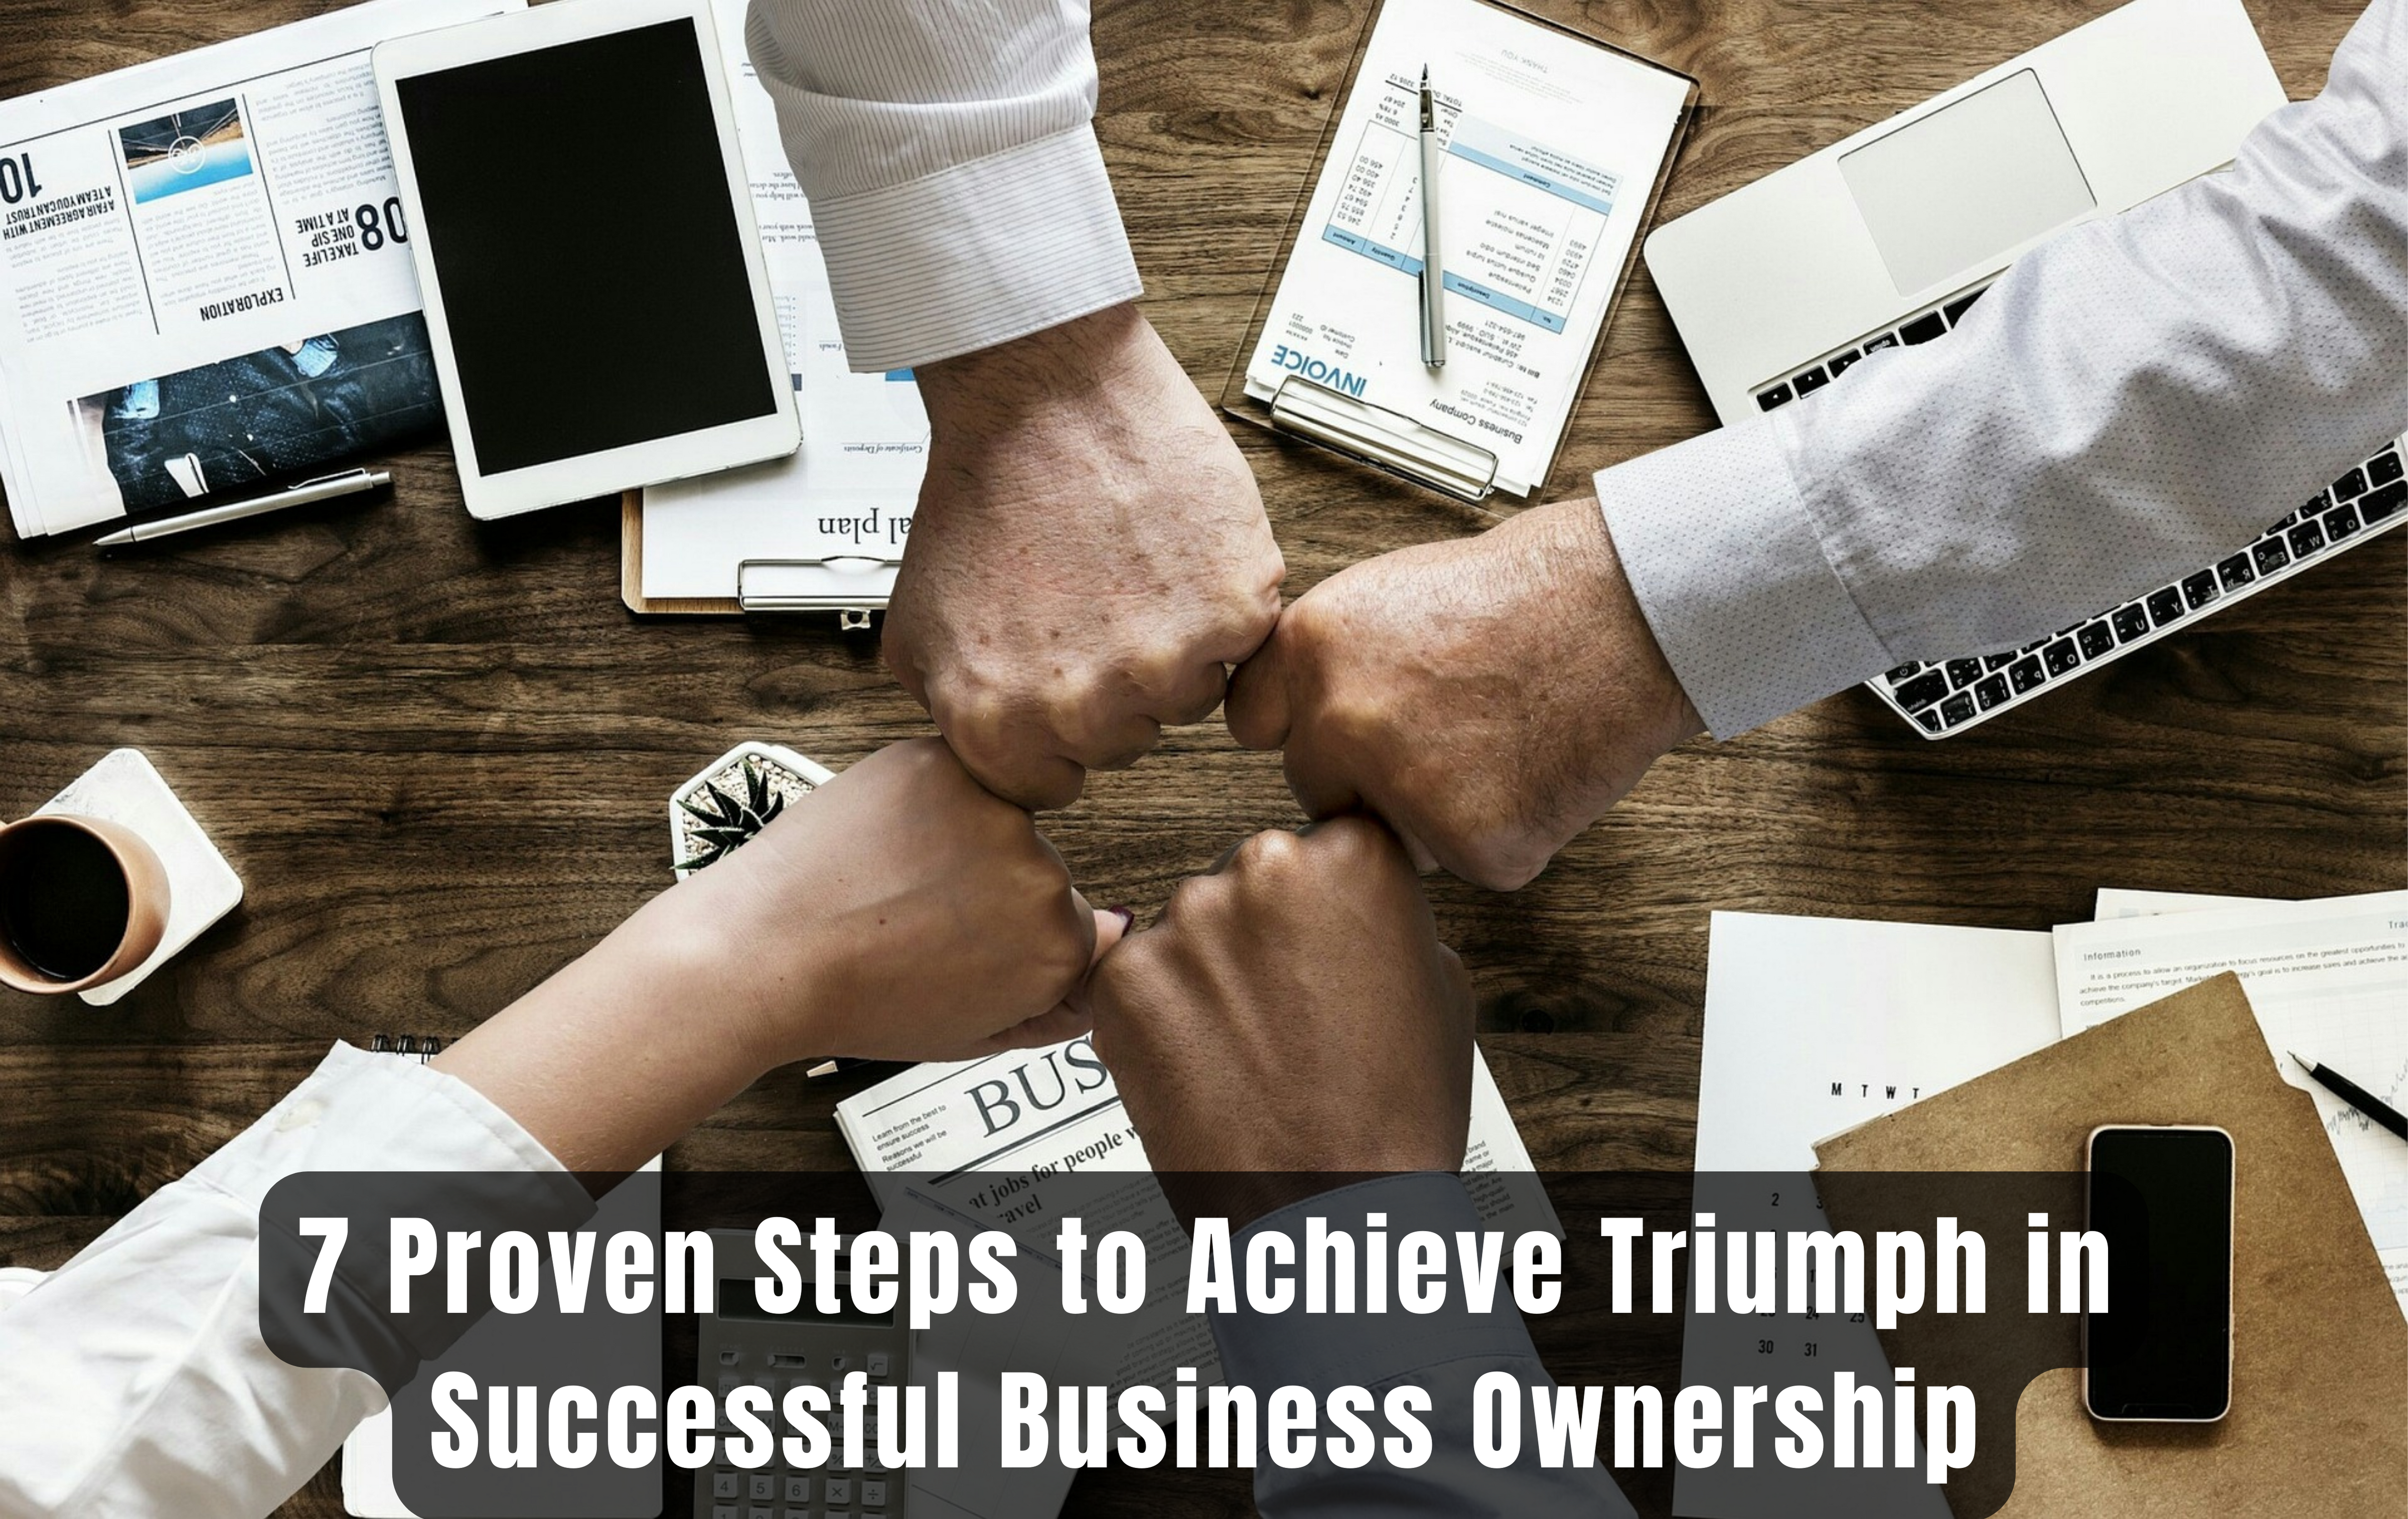 7 Proven Steps to Achieve Triumph in Successful Business Ownership